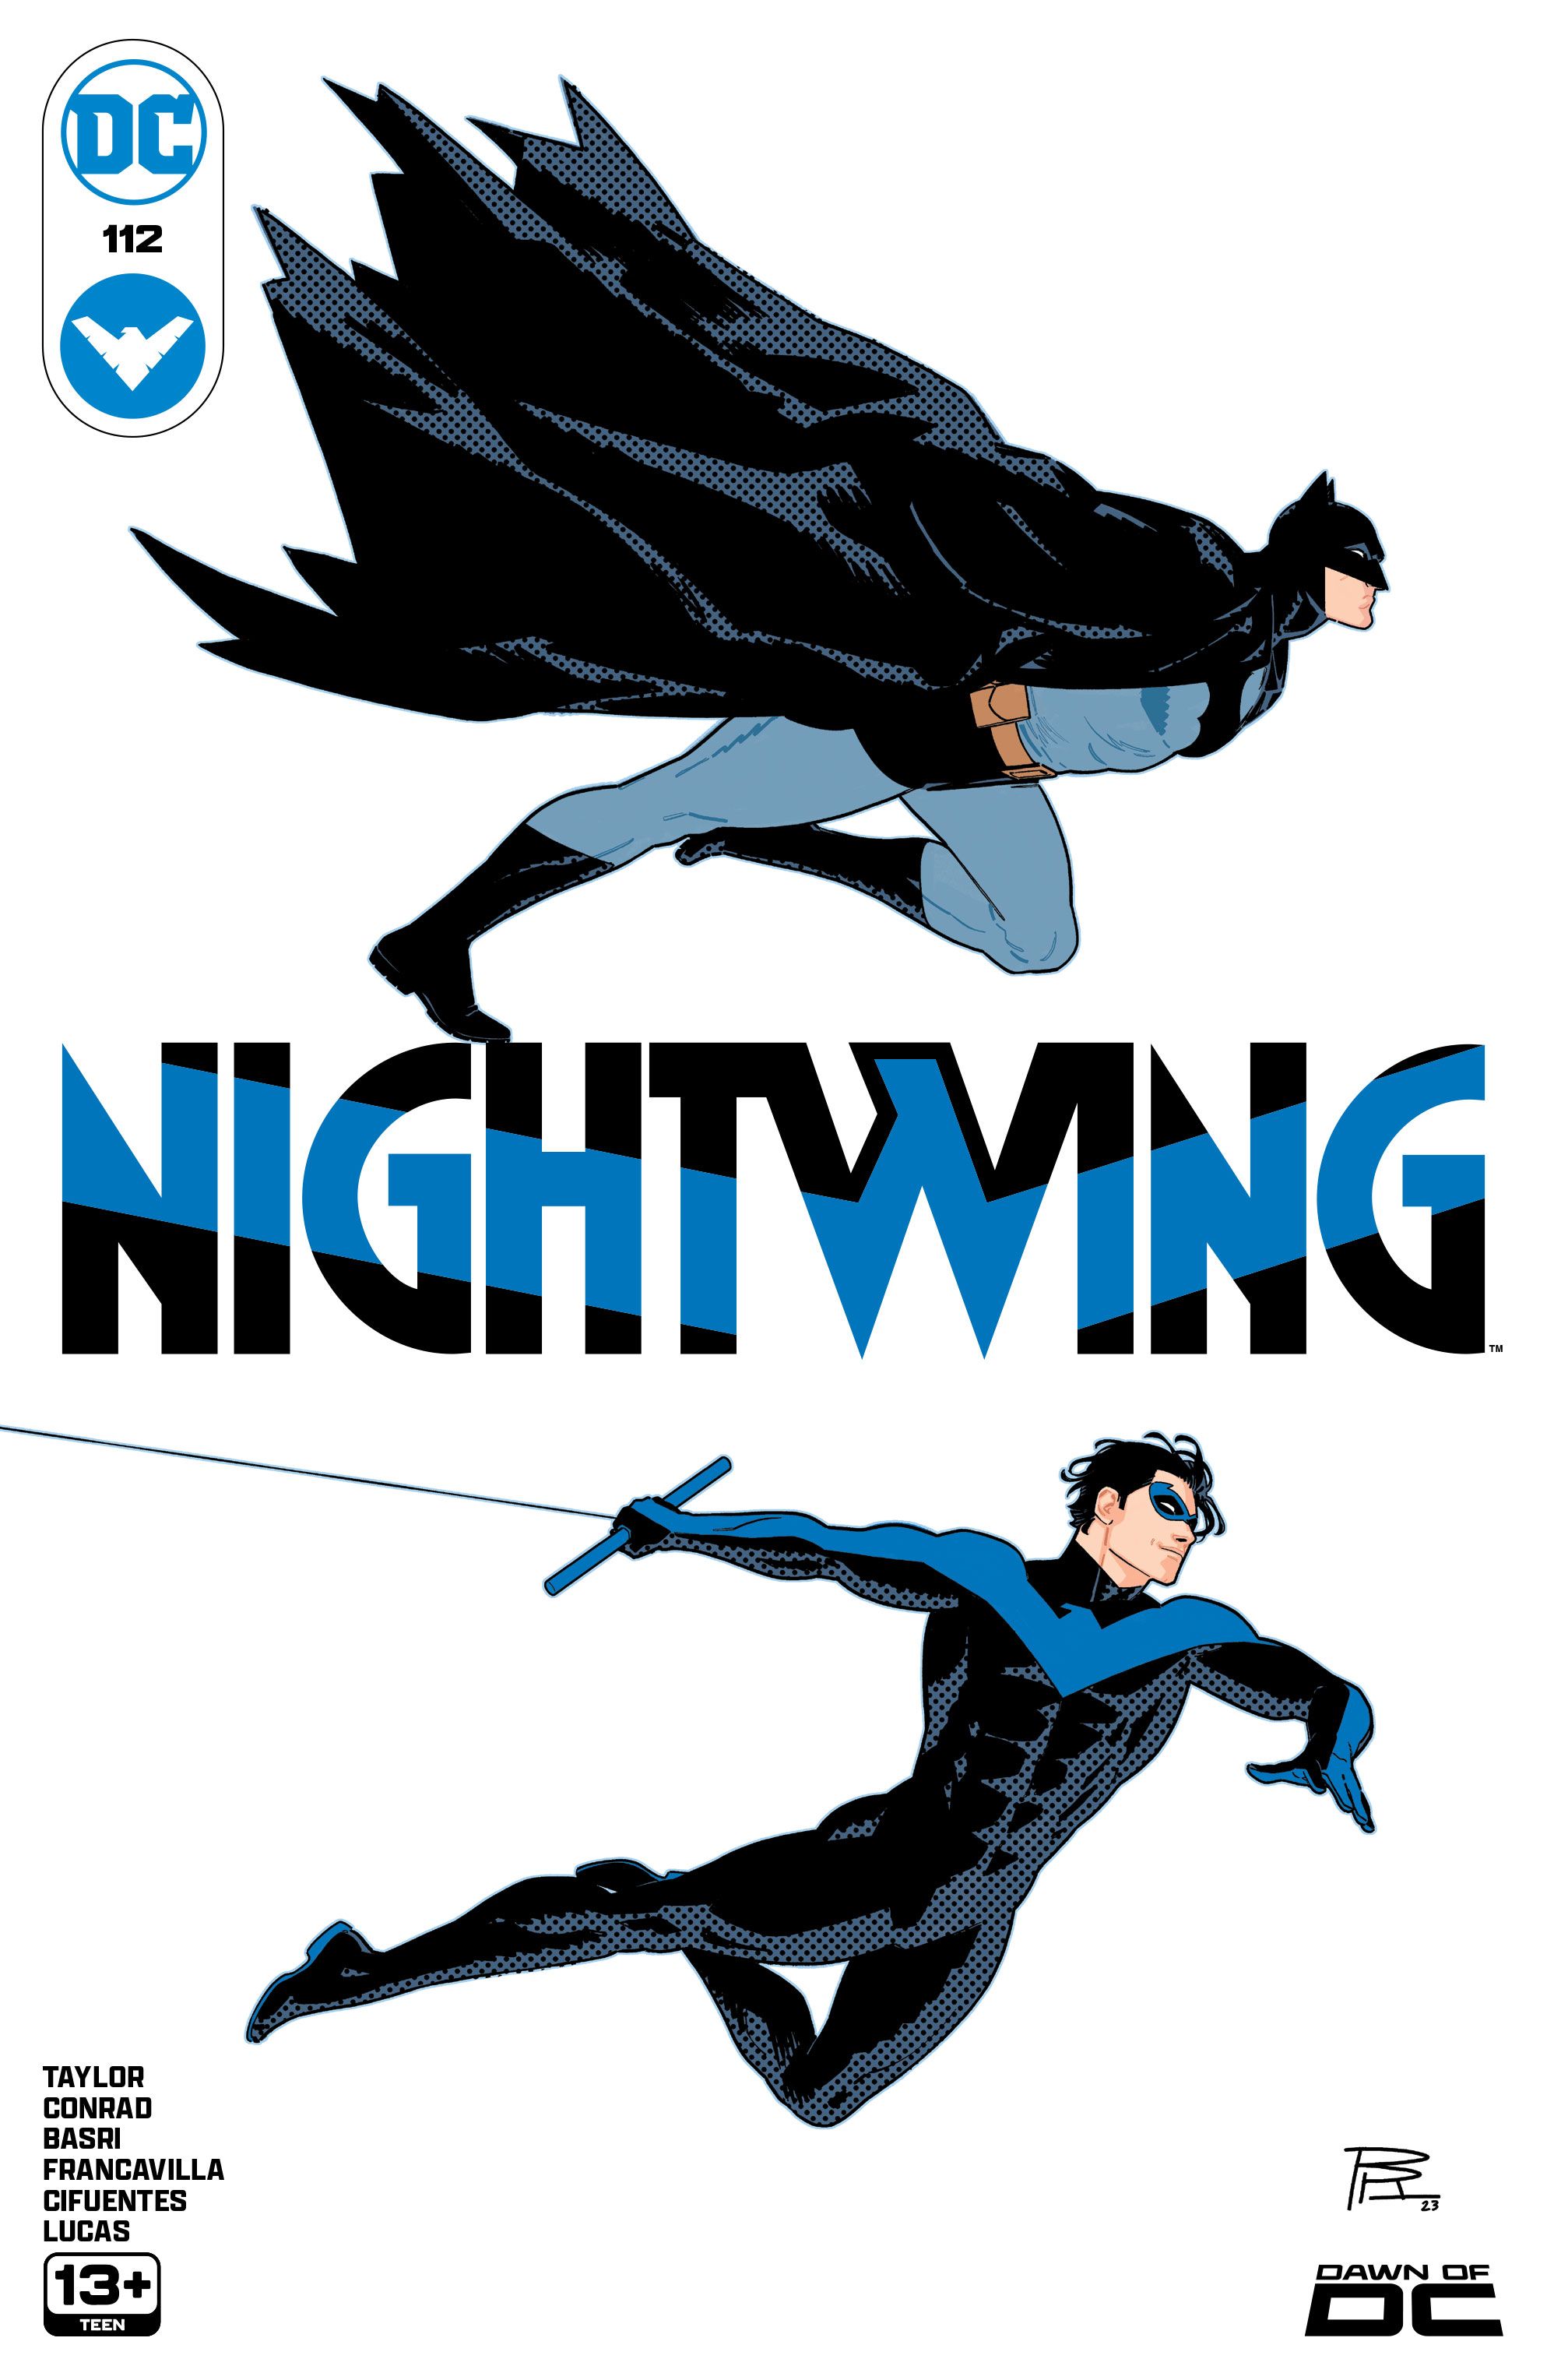 Nightwing 112 Main Cover: Batman and Nightwing moving to the right over a white background.